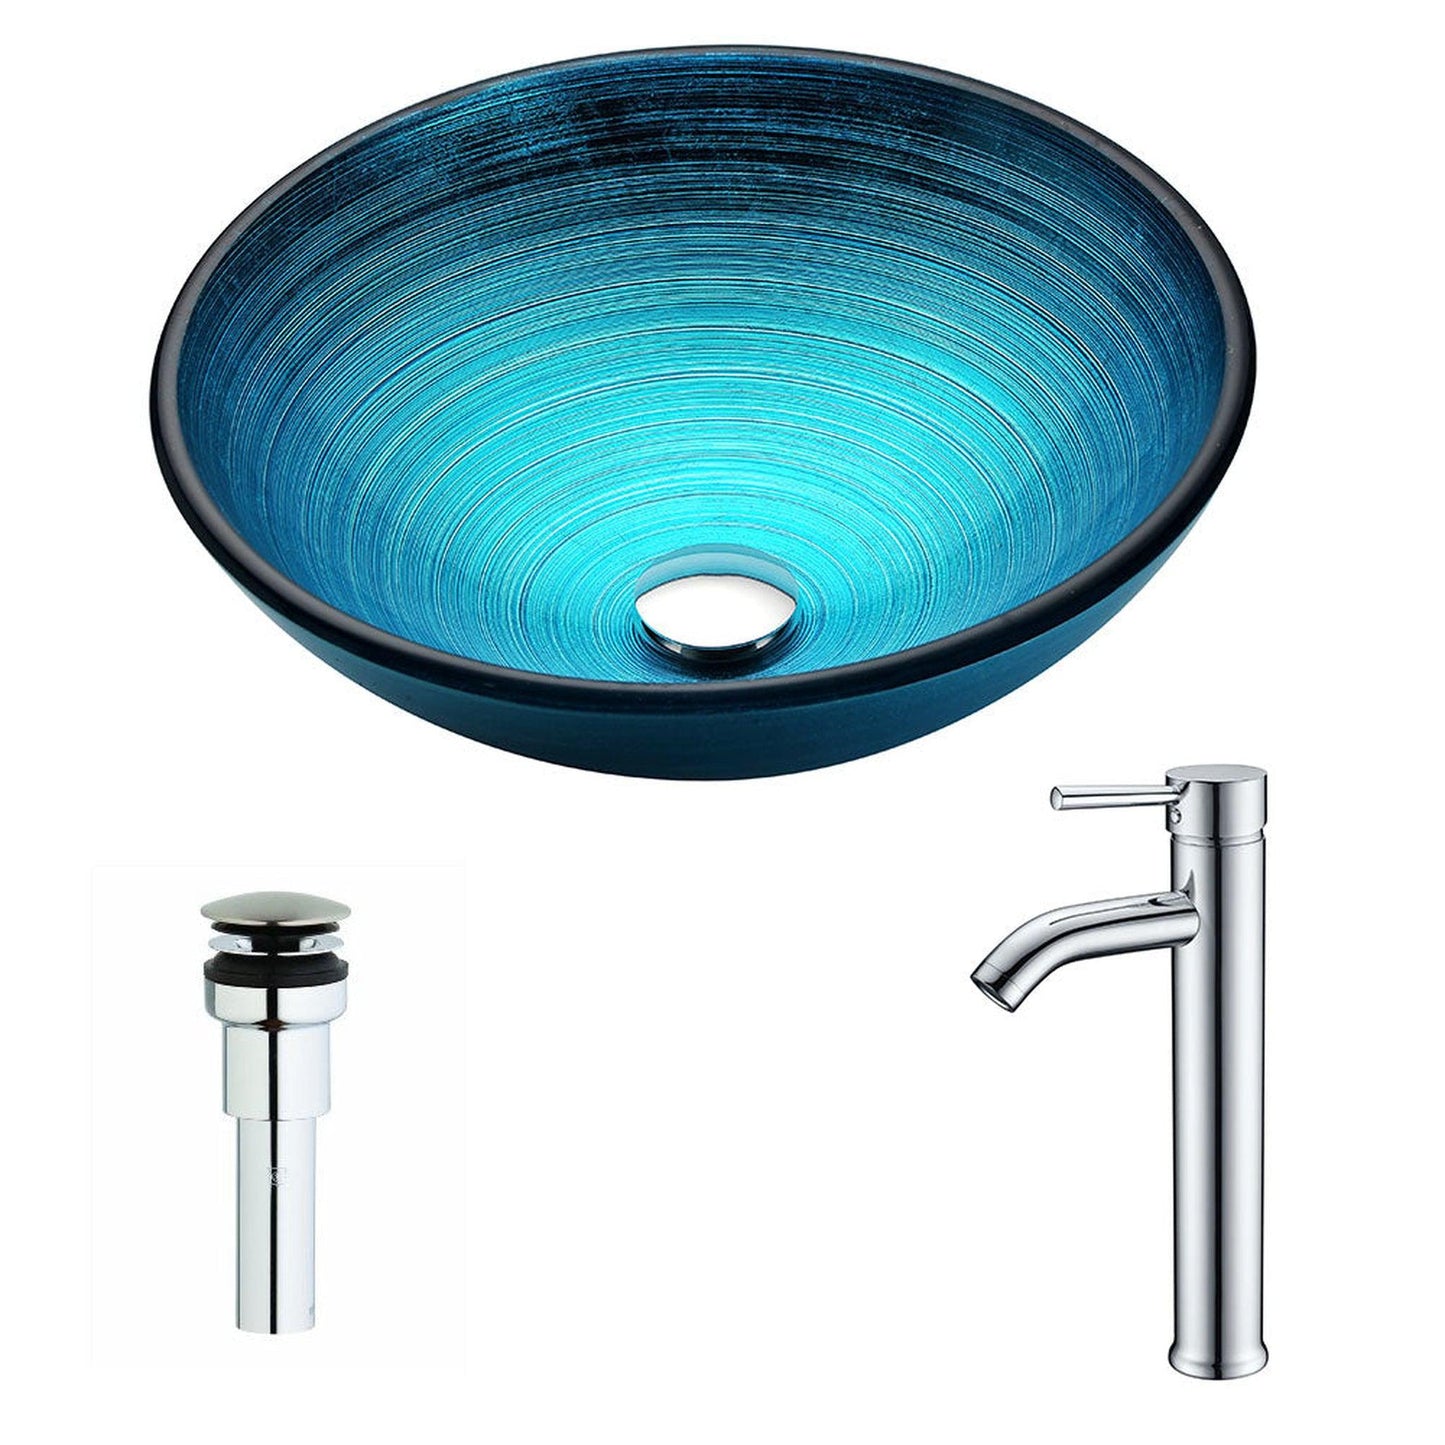 ANZZI Enti Series 17" x 17" Round Lustrous Blue Deco-Glass Vessel Sink With Chrome Pop-Up Drain and Fann Faucet